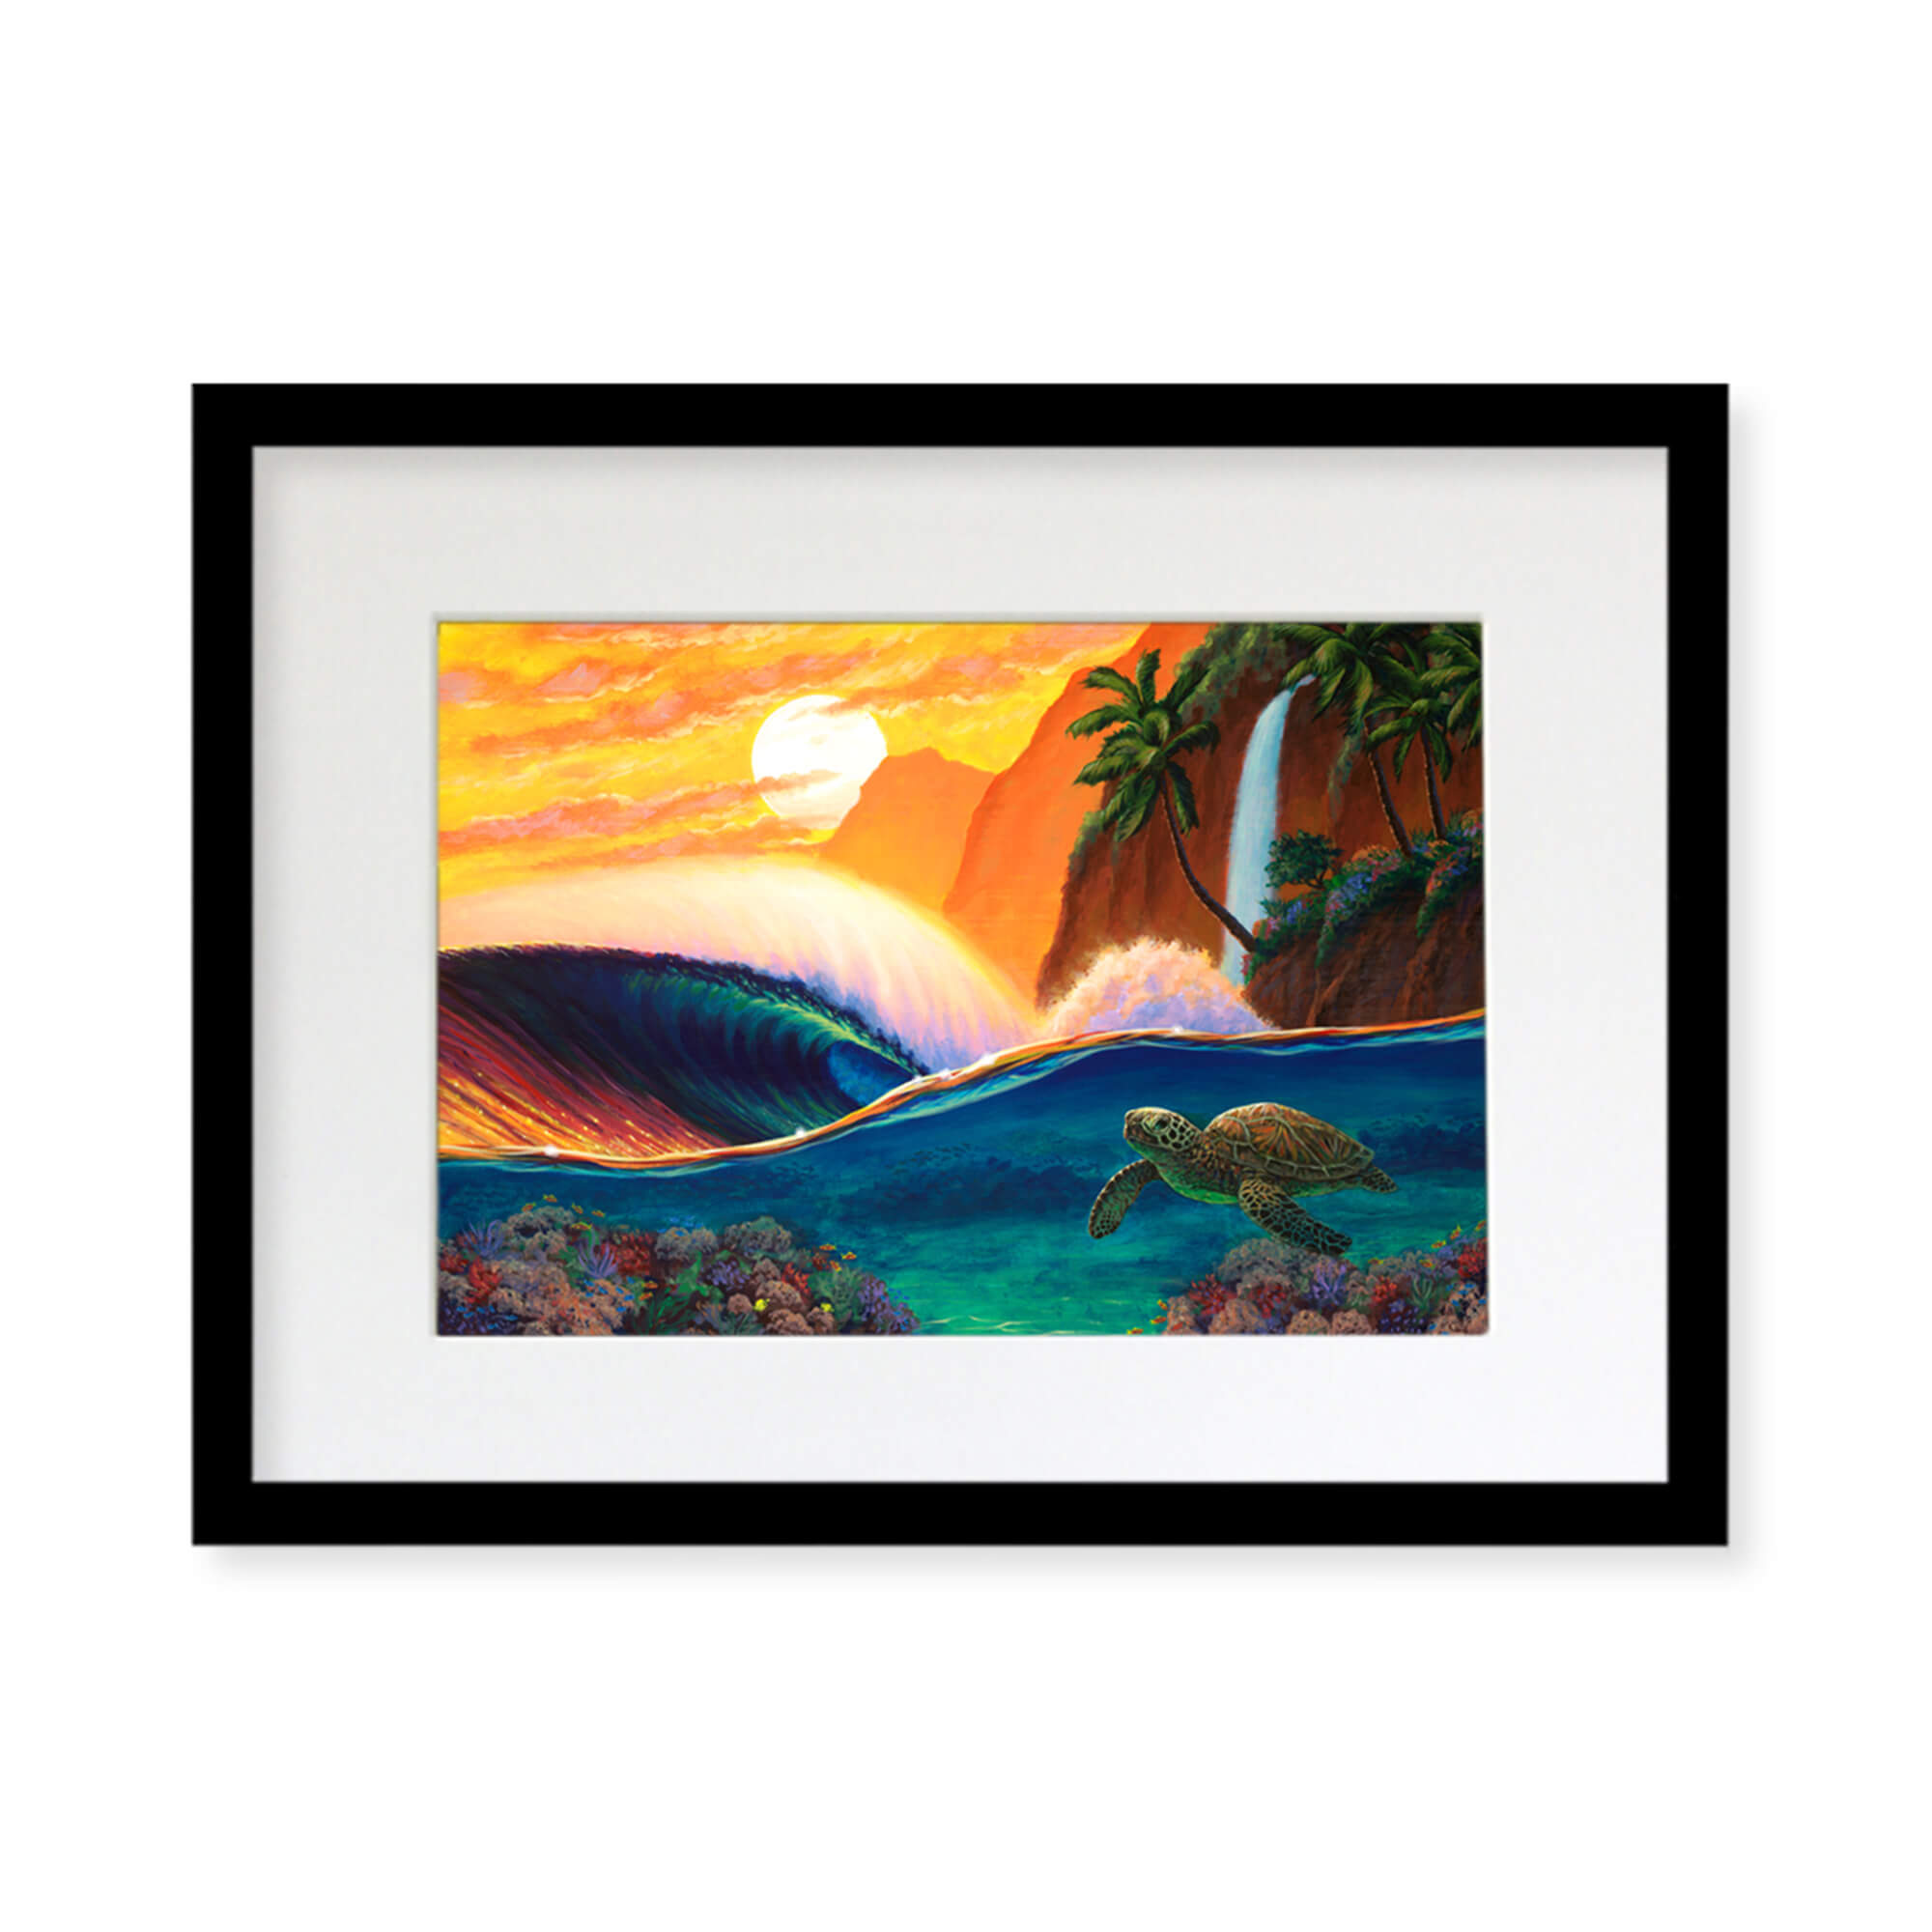 A framed matted art print featuring a sea turtle swimming and a vibrant sunset, crashing waves, and a mountain waterfall background by Hawaii artist Patrick Parker